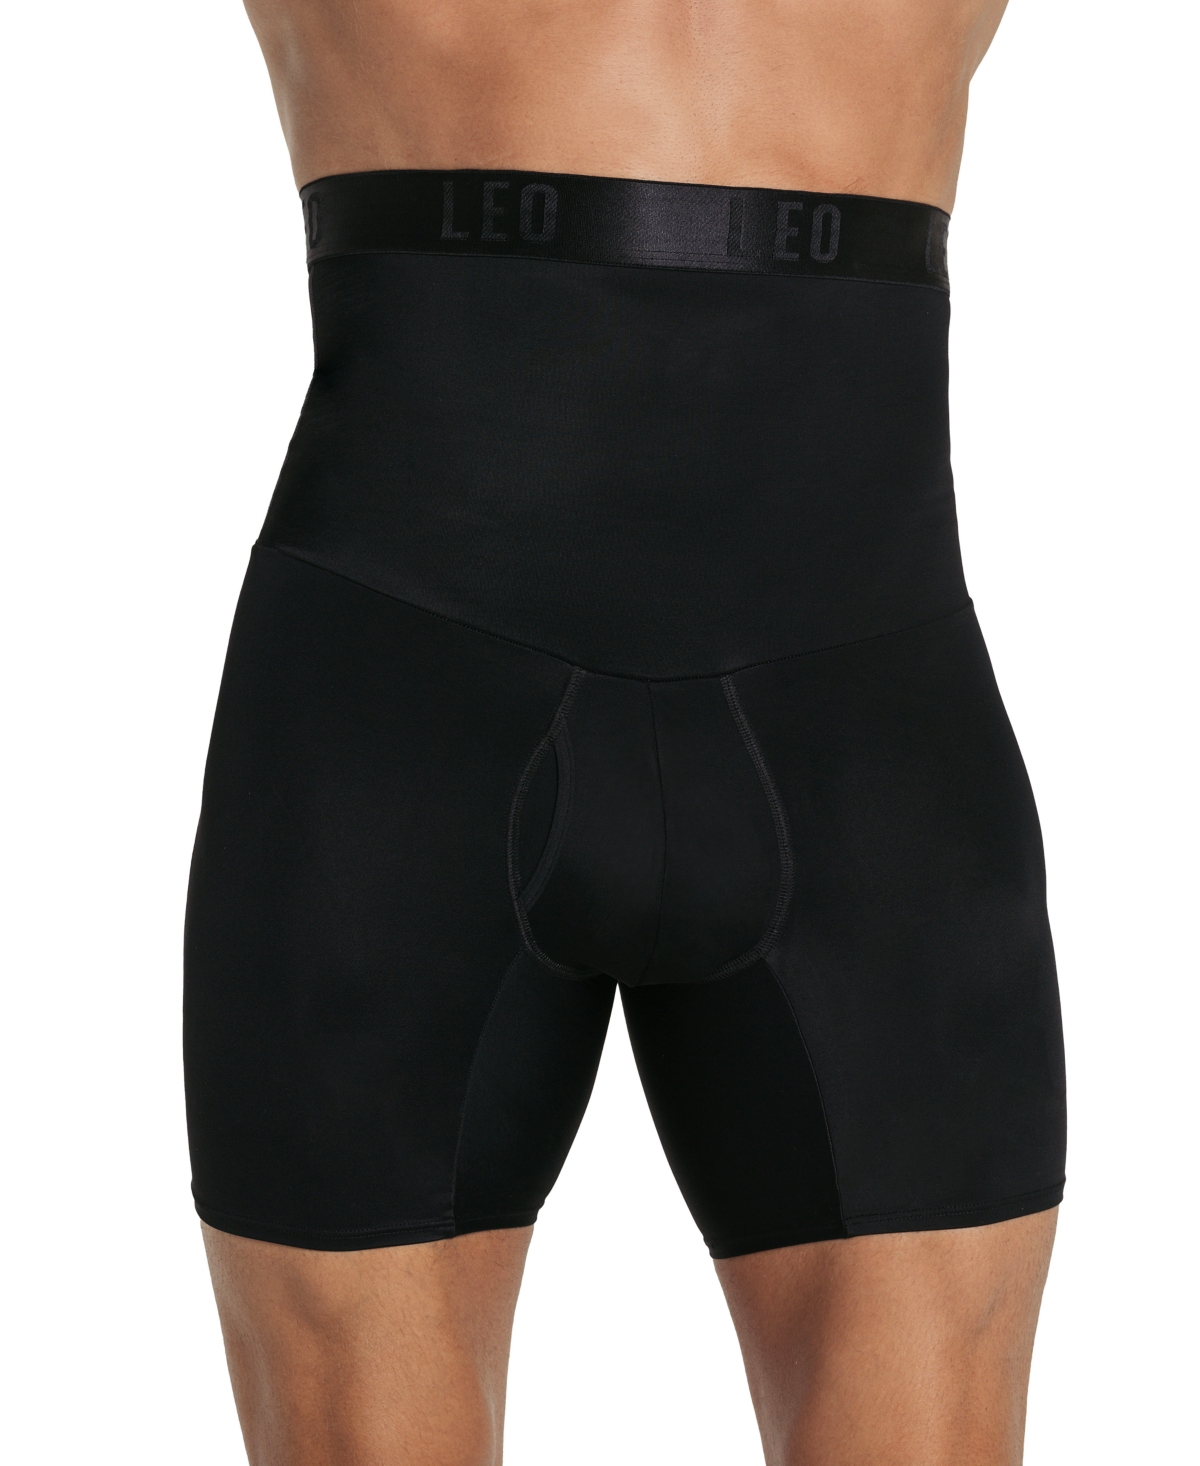 High Waist Stomach Shaper With Boxer - Black